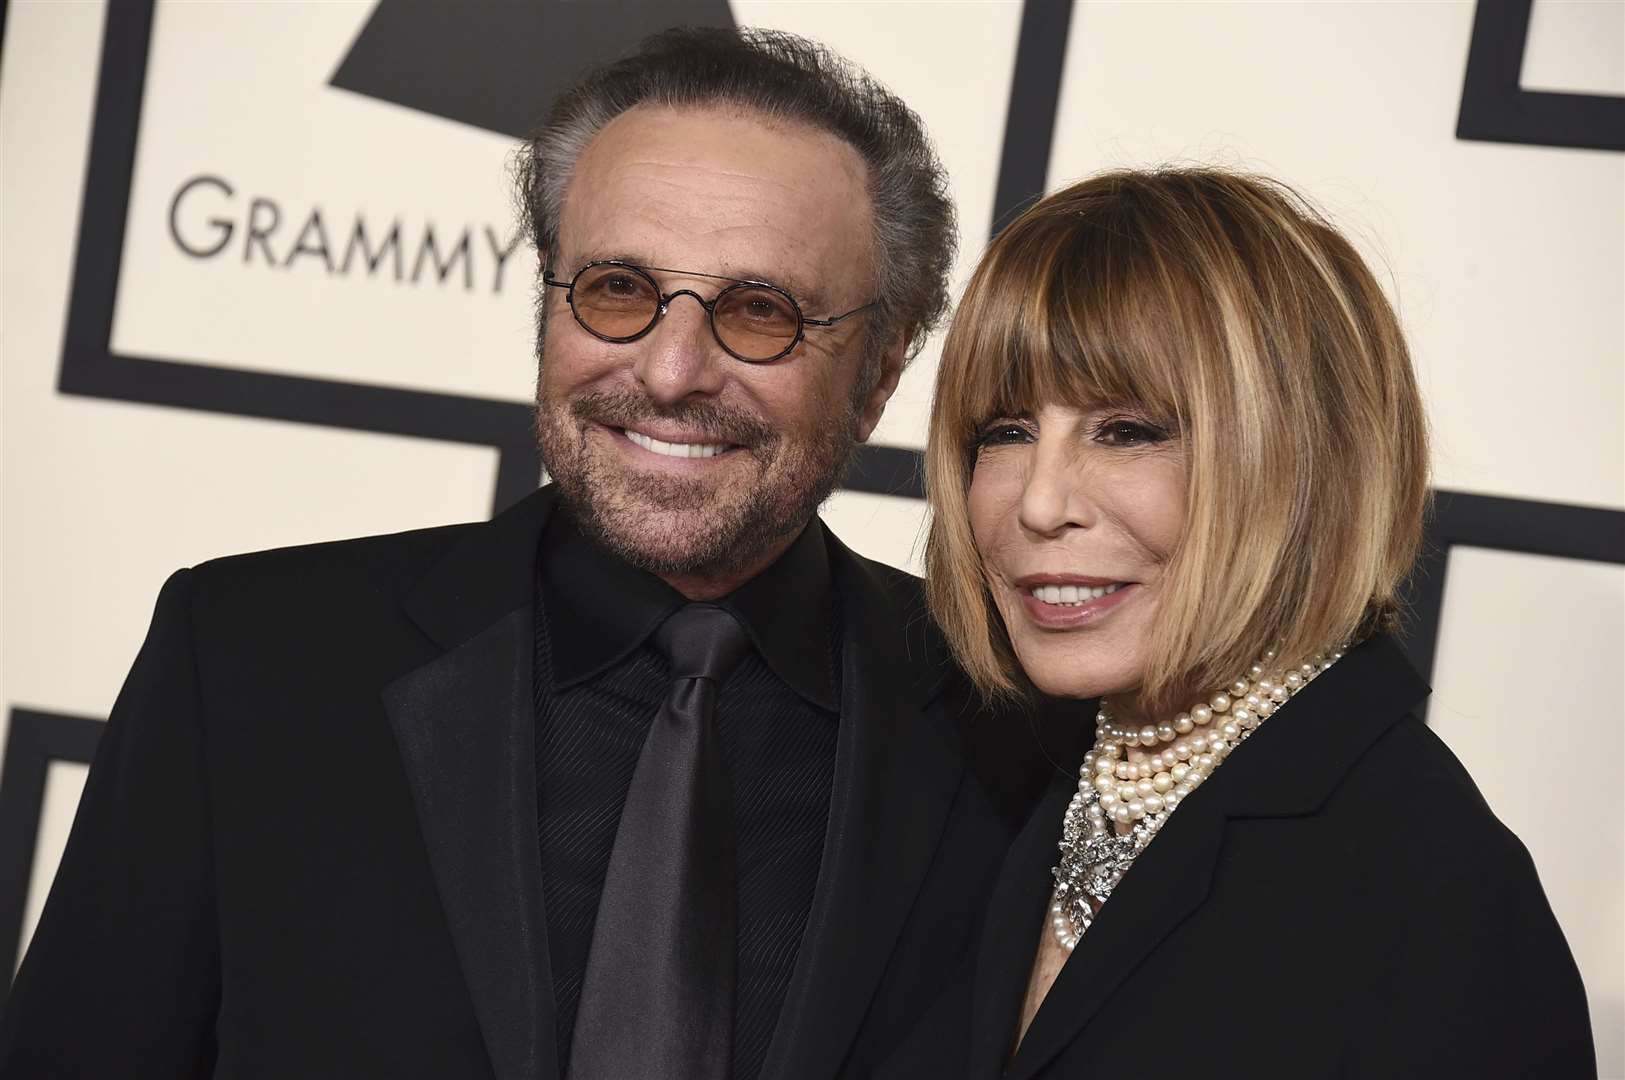 Barry Mann, left, and Cynthia Weil arrive at the 57th annual Grammy Awards (Photo by Jordan Strauss/Invision/AP, File)